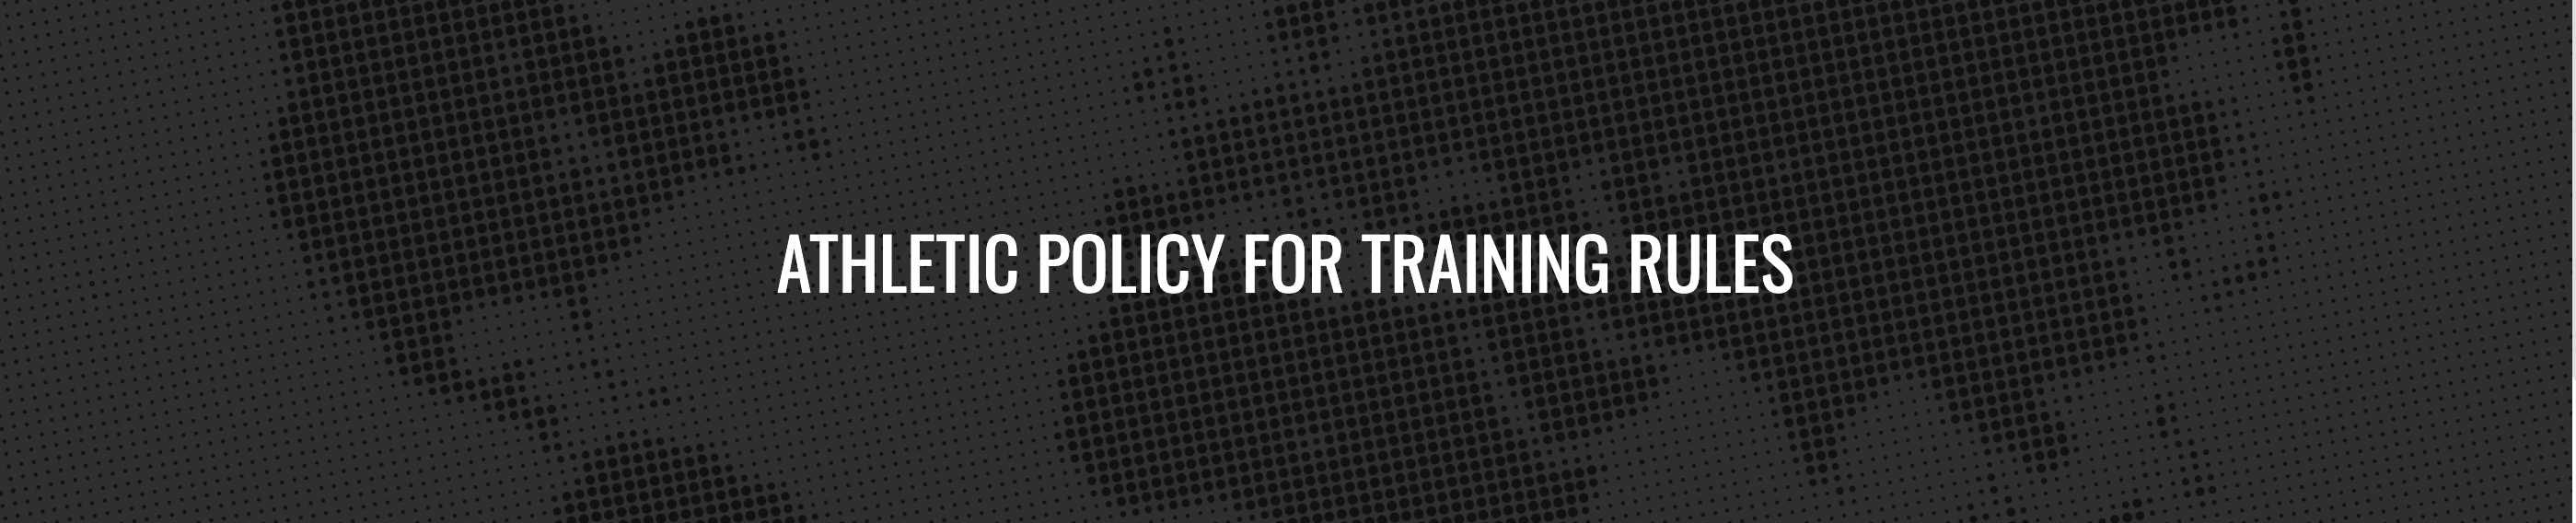 athletic policy for training rules